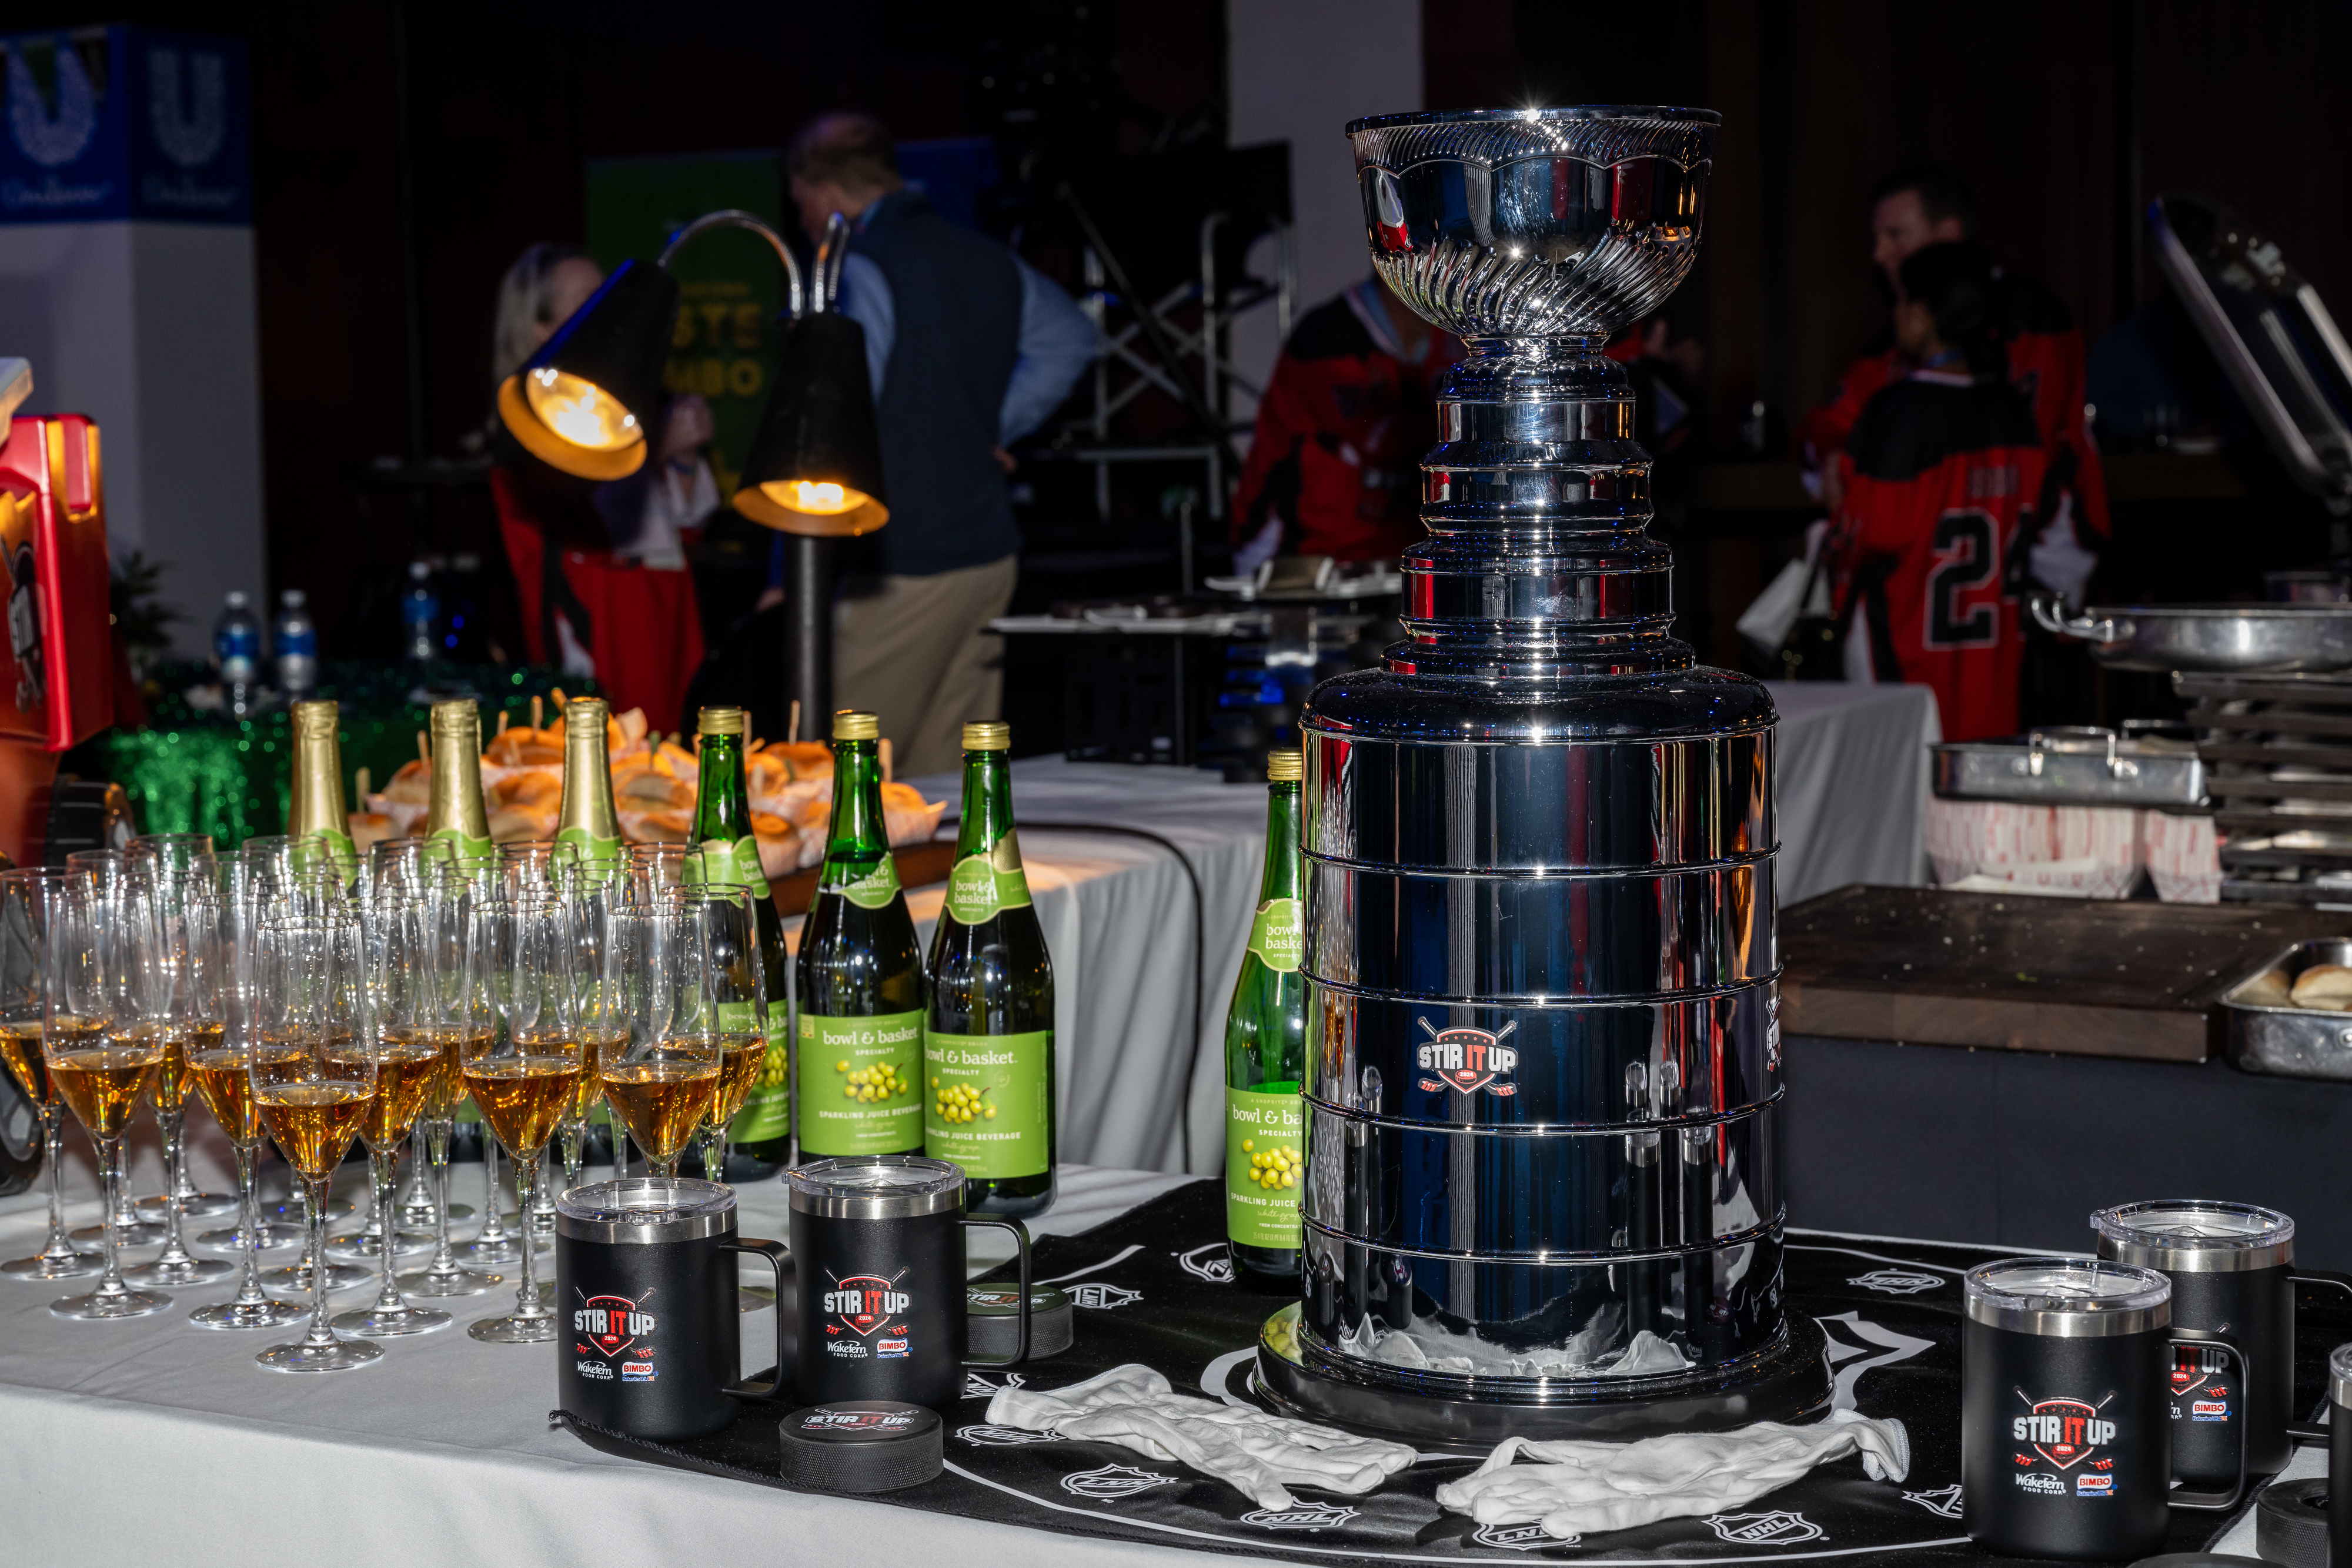 Bimbo Bakeries and Wakefern Kitchen Setup with Stanley Cup-type